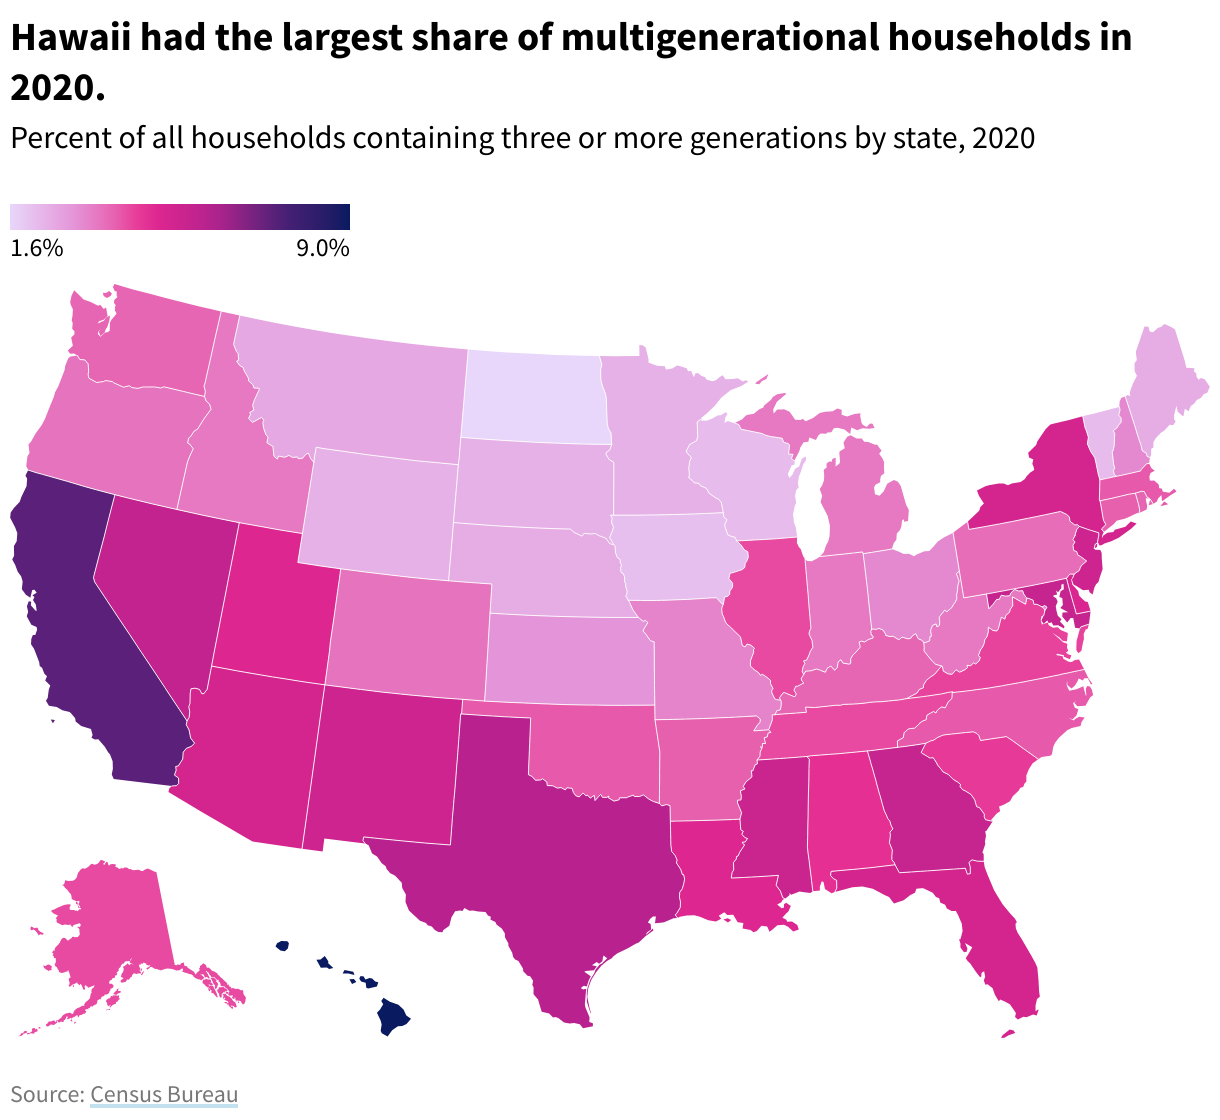 Map of the US showing the percent of all households containing three or more generations, 2020. Hawaii had the largest share of multigenerational households at 9%. 